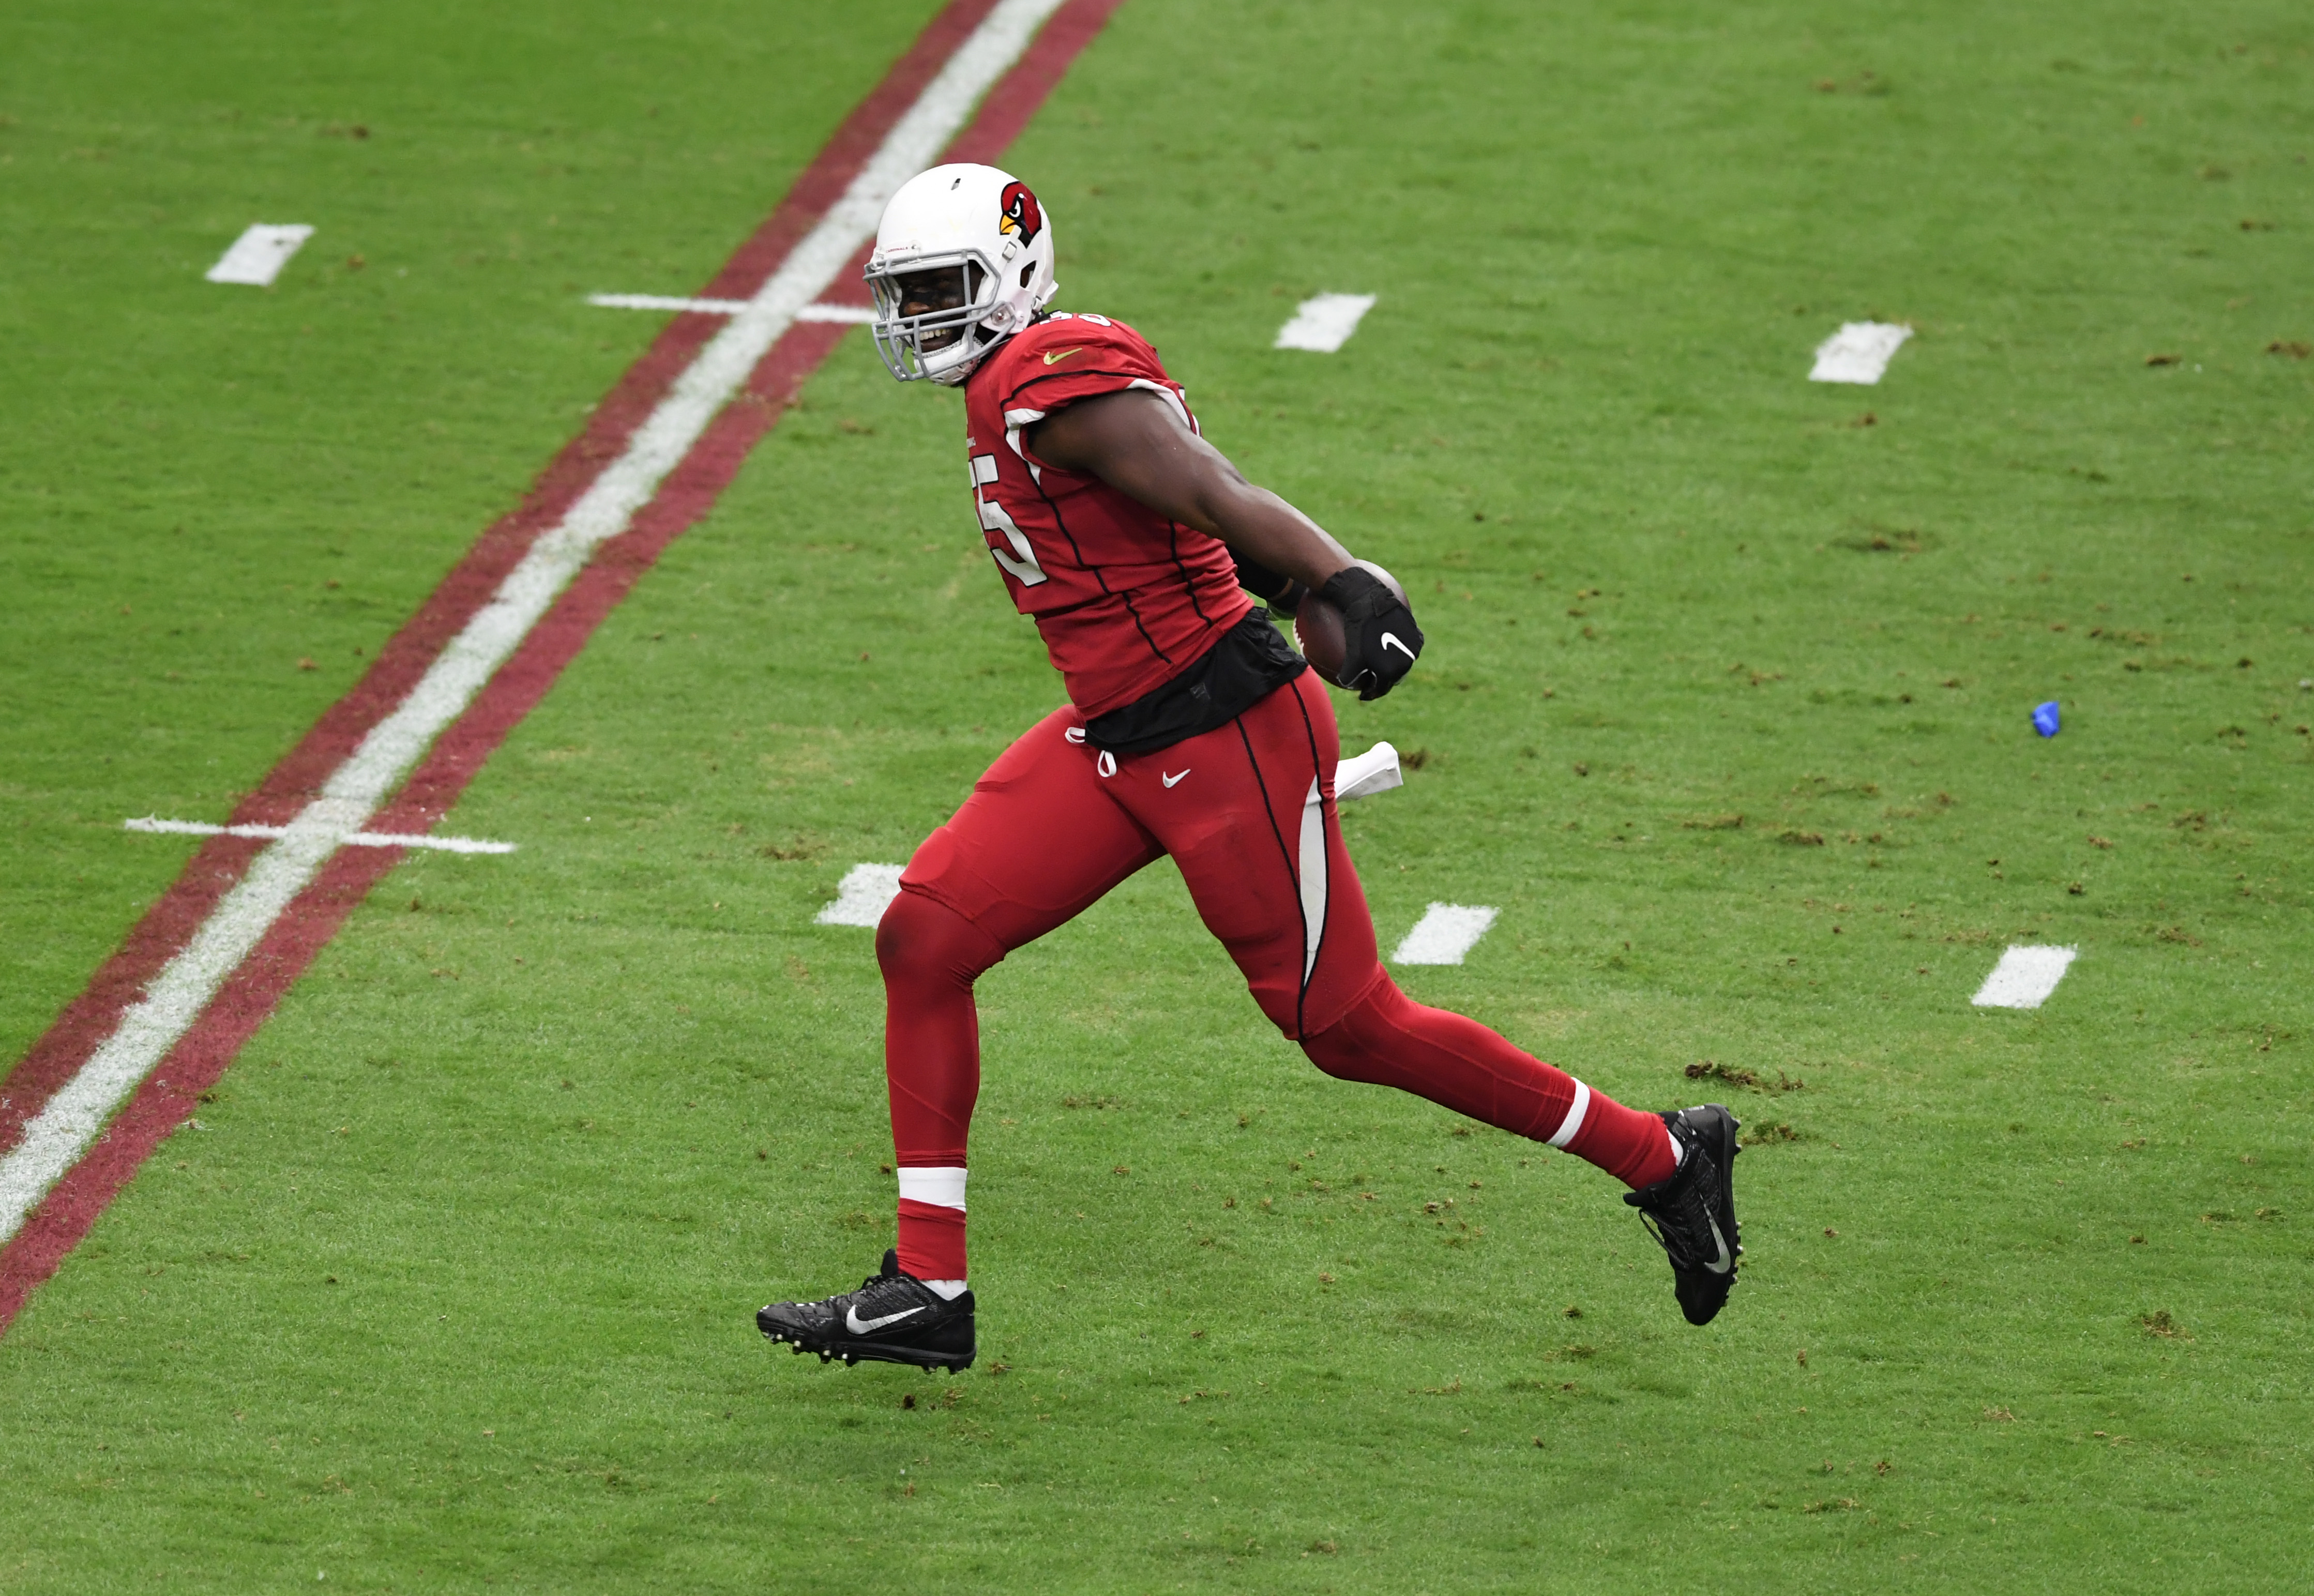 Arizona Cardinals star Chandler Jones celebrates a fumble recovery during a game in September.